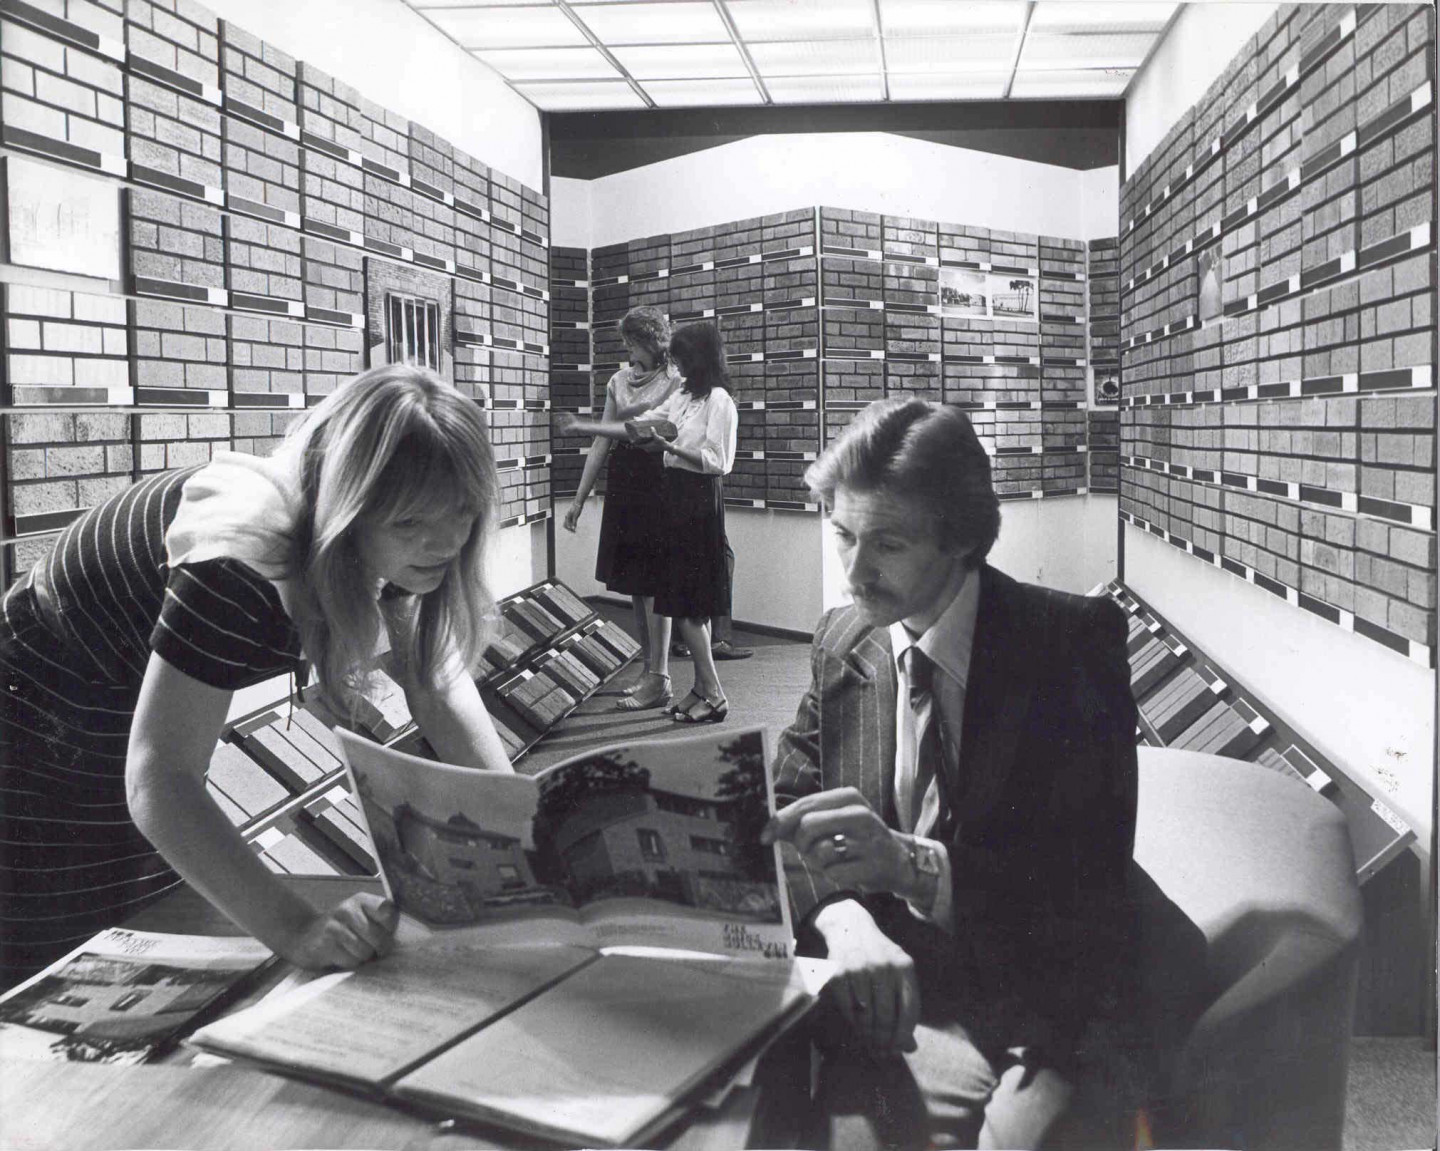 The Brick Library, Store Street, 1980s